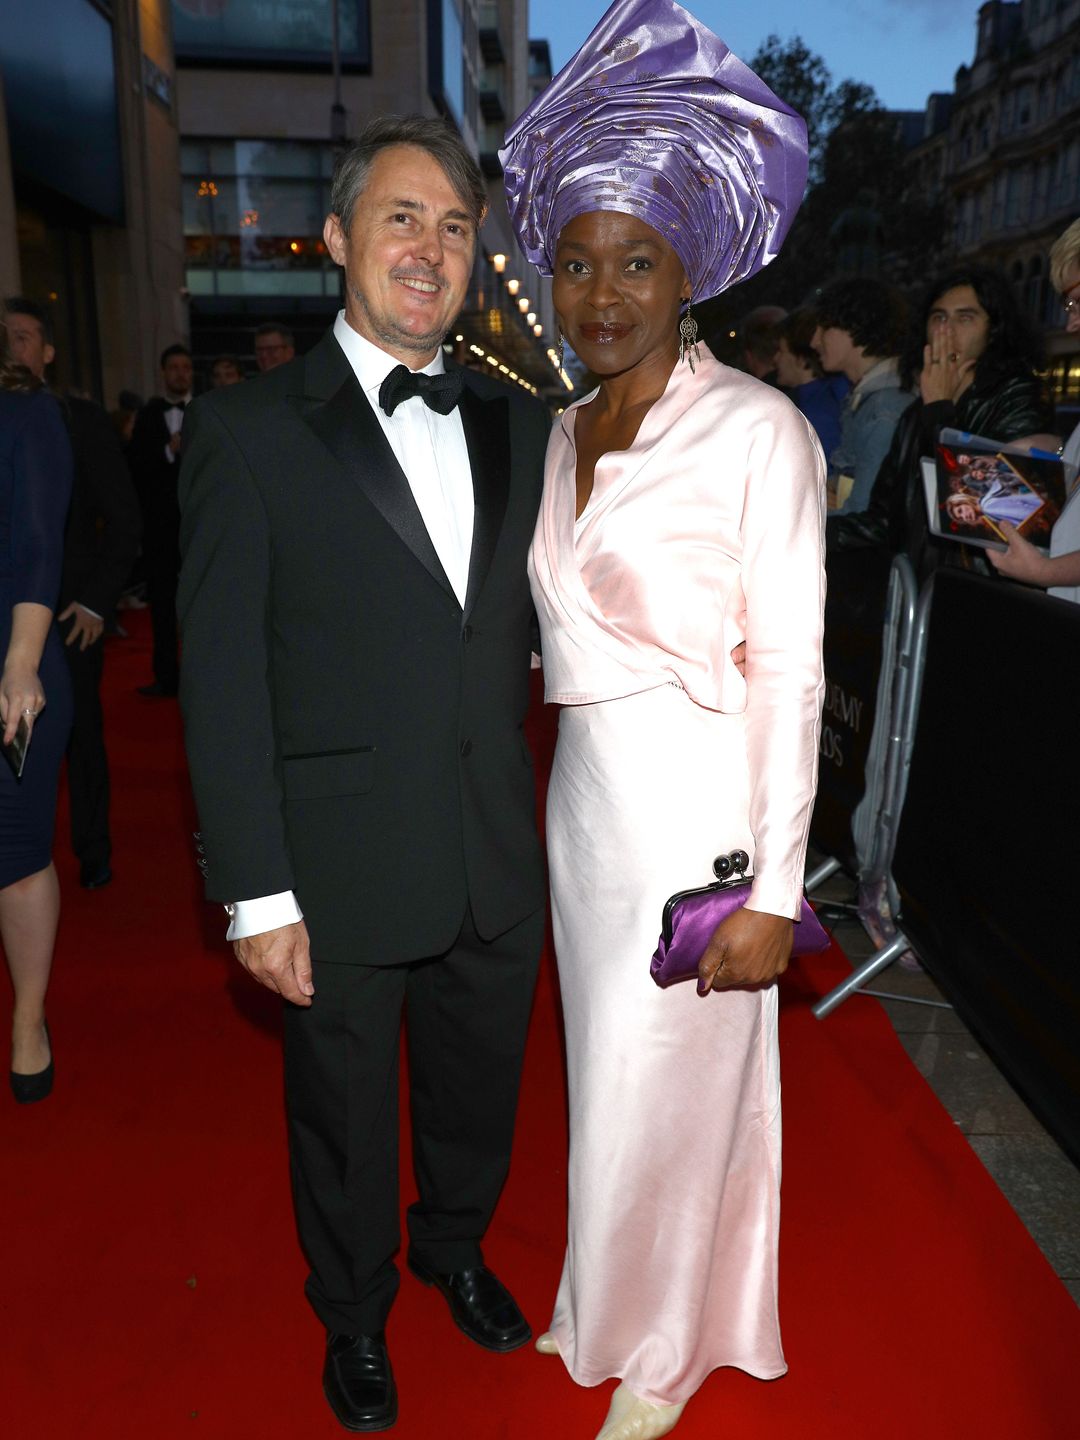 Adam Smethurst in a suit with Rakie Ayola in a pink dress and purple headdress at the British Academy Cymru Awards,